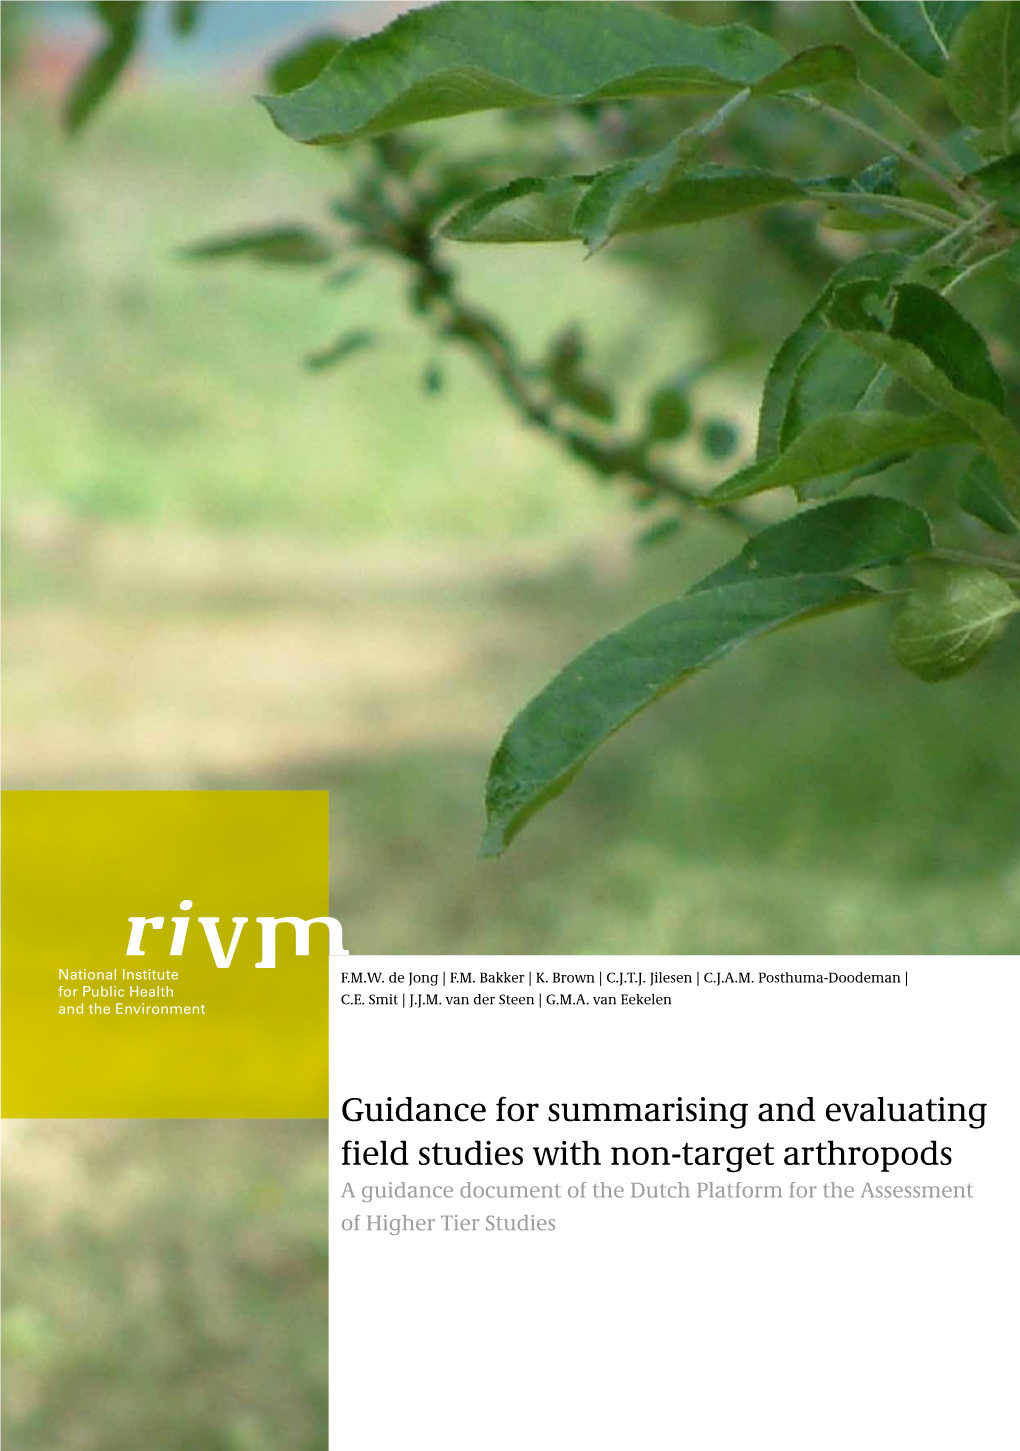 Guidance for Summarising and Evaluating Field Studies with Non-Target Arthropods